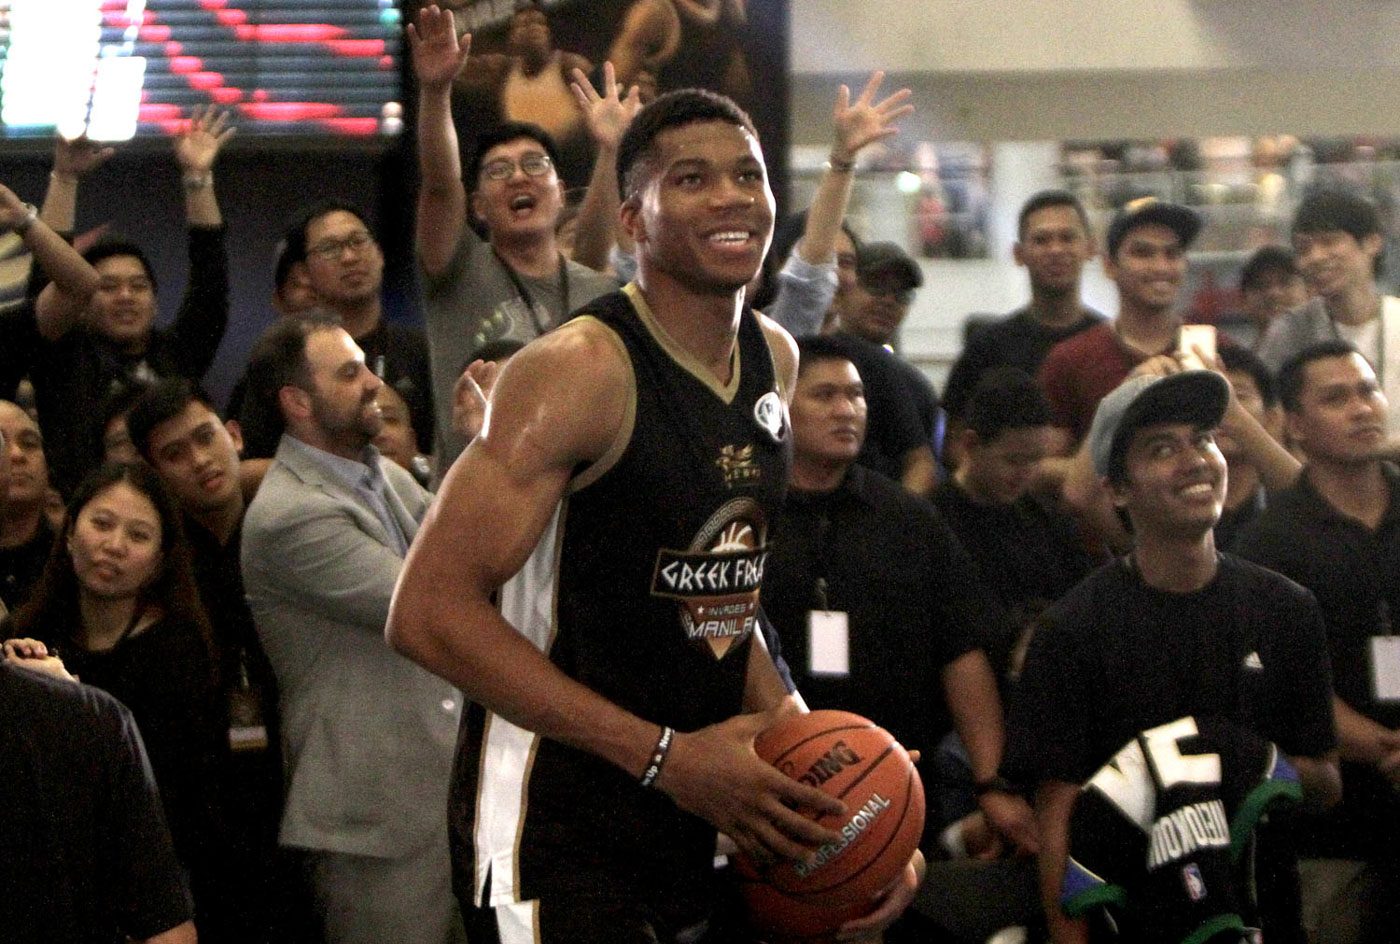 Giannis Antetokounmpo’s NBA journey led him to ‘see world a lot differently’